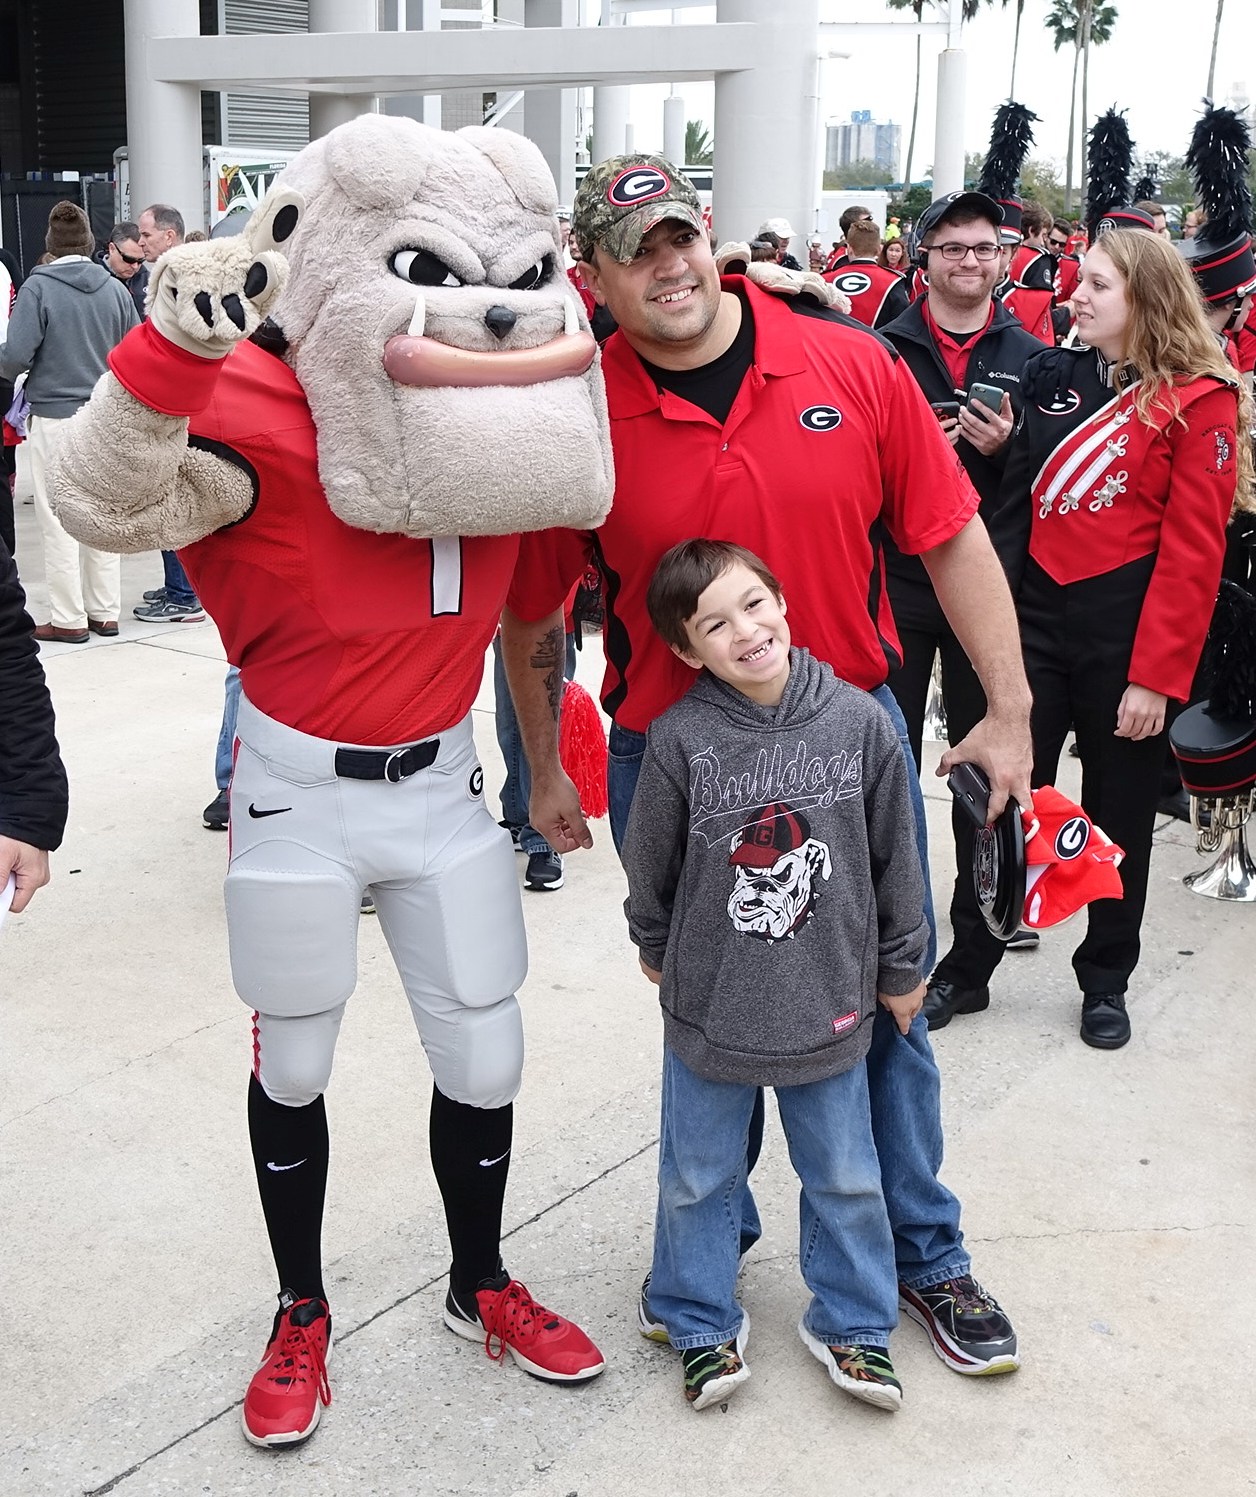 Hairy Dawg always eager to pose with fans for a photo op - Dawg Walk - TaxSlayer Bowl - 02-JAN-2016 (Photo by Greg Poole)